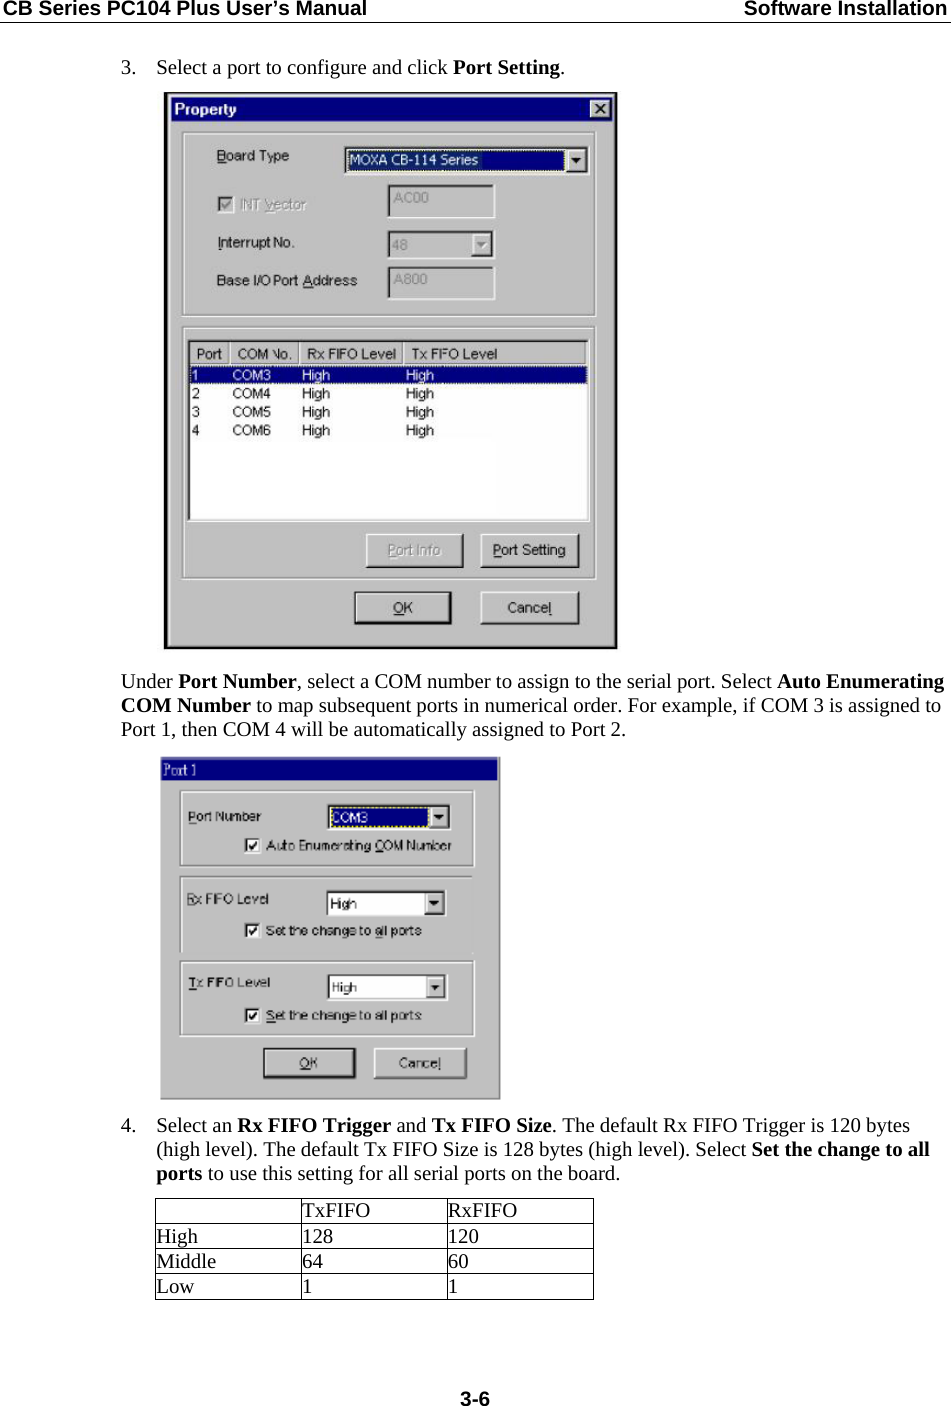 CB Series PC104 Plus User’s Manual  Software Installation 3. Select a port to configure and click Port Setting.  Under Port Number, select a COM number to assign to the serial port. Select Auto Enumerating COM Number to map subsequent ports in numerical order. For example, if COM 3 is assigned to Port 1, then COM 4 will be automatically assigned to Port 2.  4. Select an Rx FIFO Trigger and Tx FIFO Size. The default Rx FIFO Trigger is 120 bytes (high level). The default Tx FIFO Size is 128 bytes (high level). Select Set the change to all ports to use this setting for all serial ports on the board.  TxFIFO RxFIFO High 128  120 Middle 64  60 Low 1  1   3-6